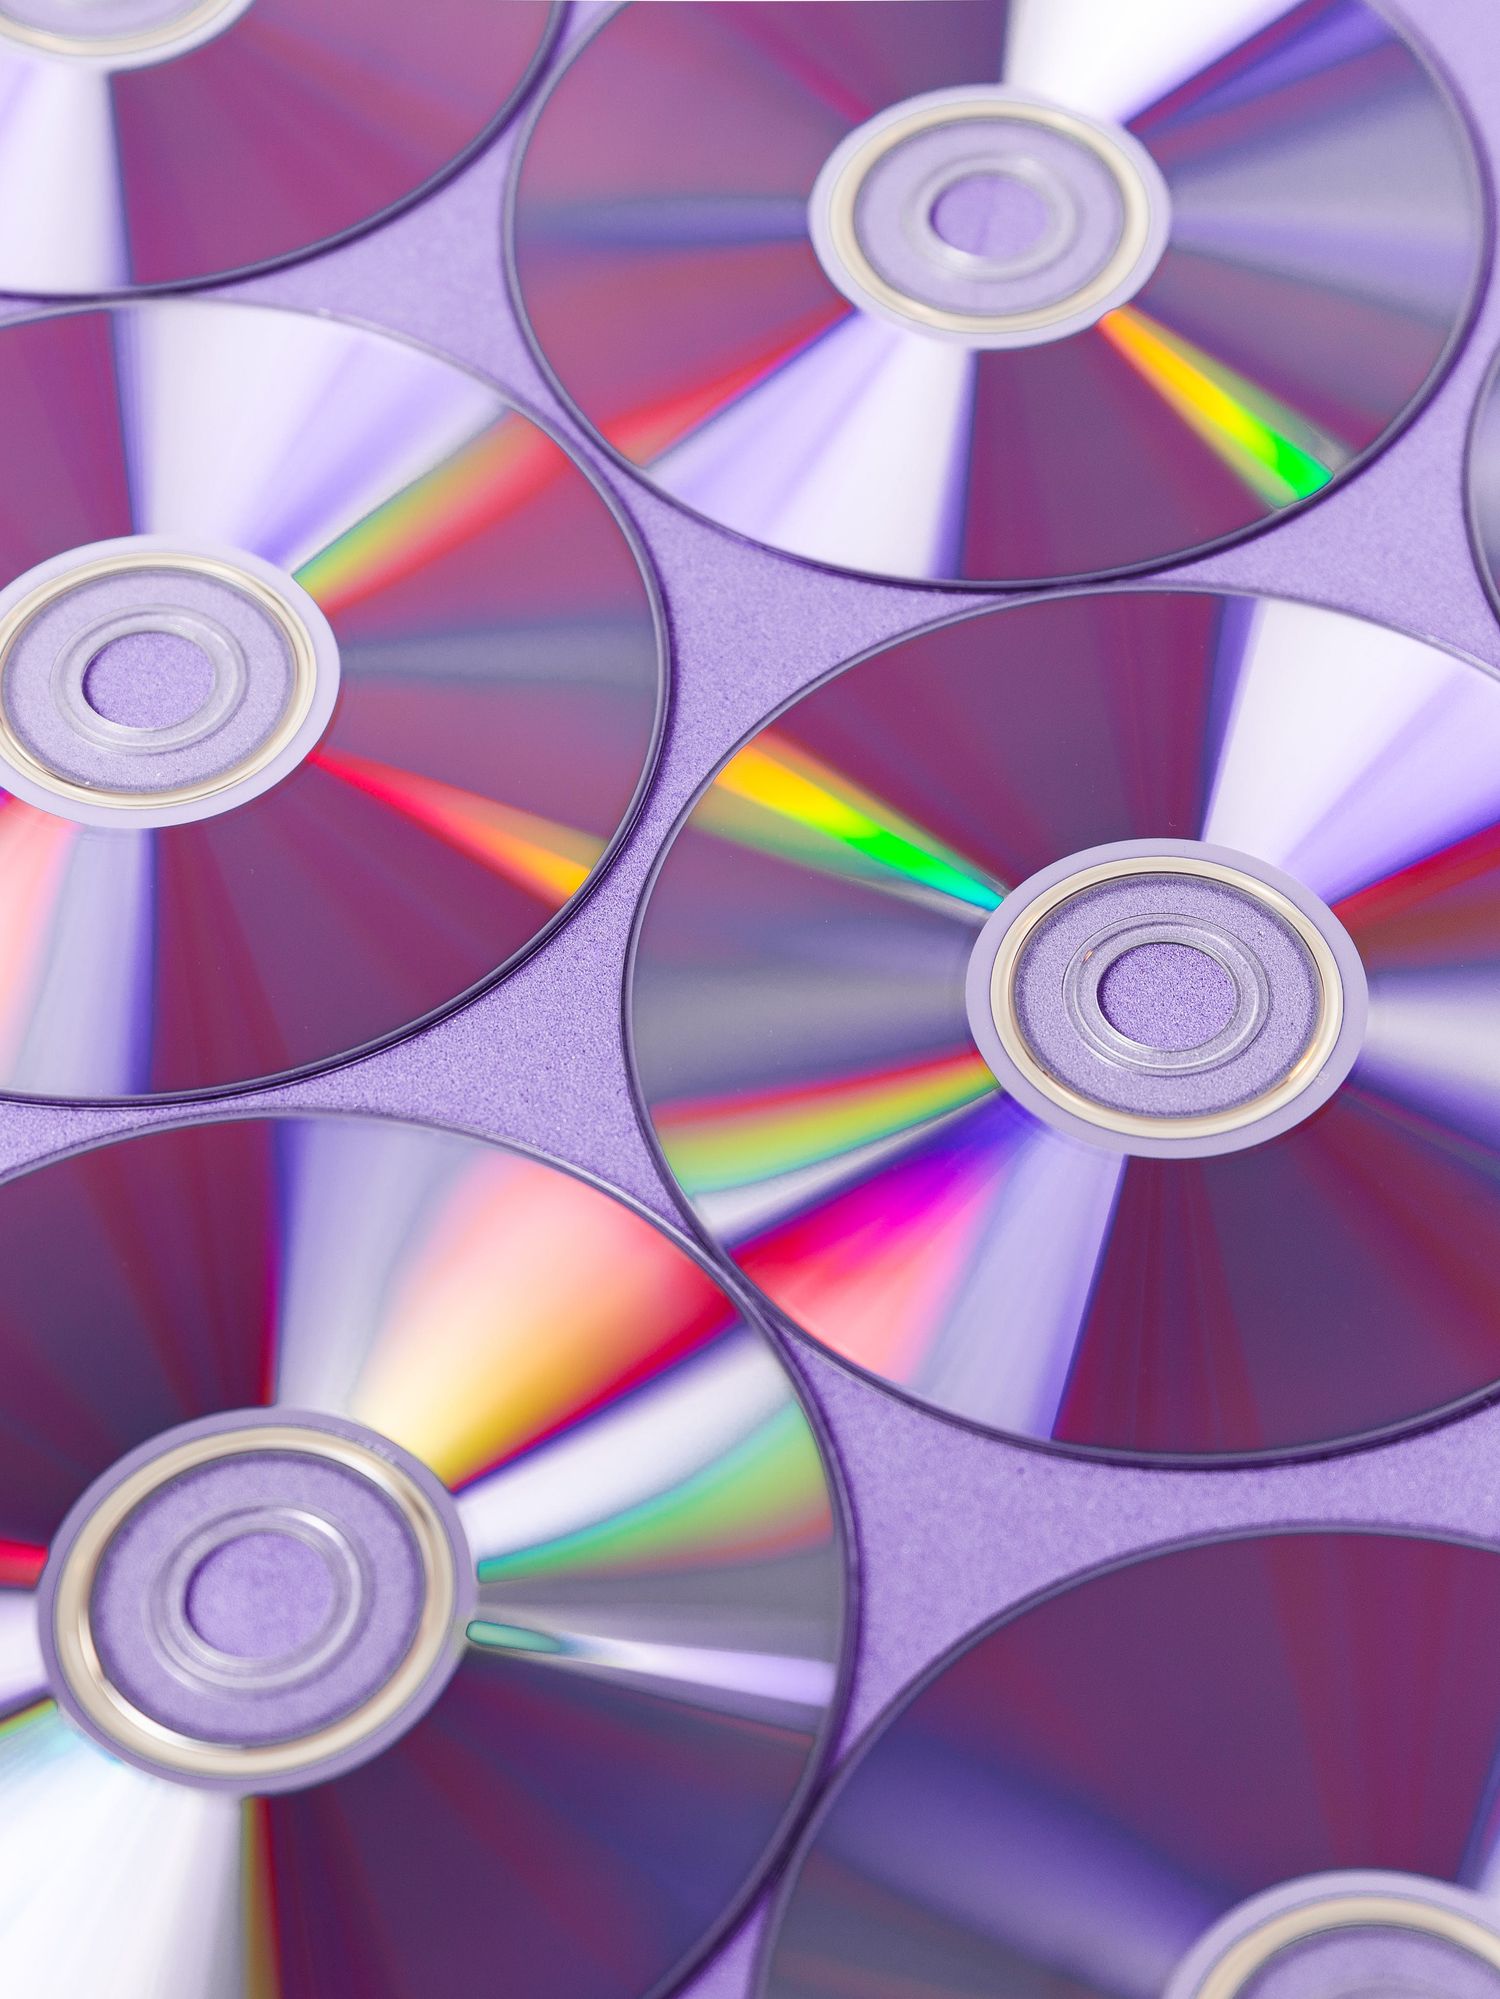 blank CDs lined up